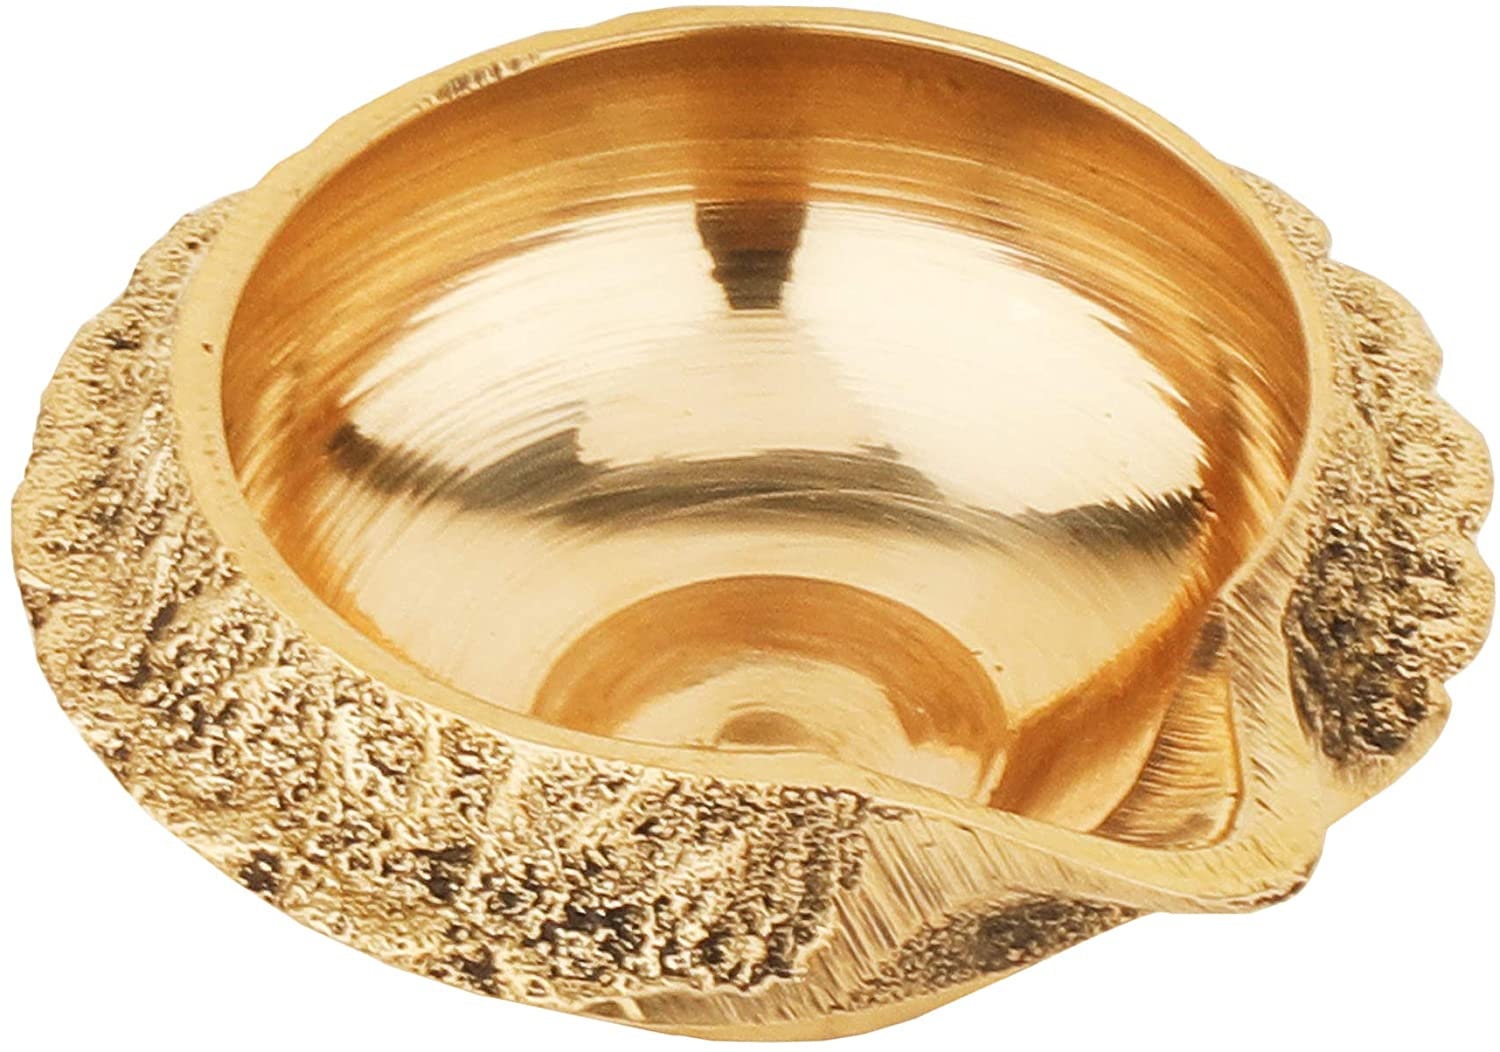 Pure Brass Special Puja Thali Set of 9 Items, for Diwali Poojan